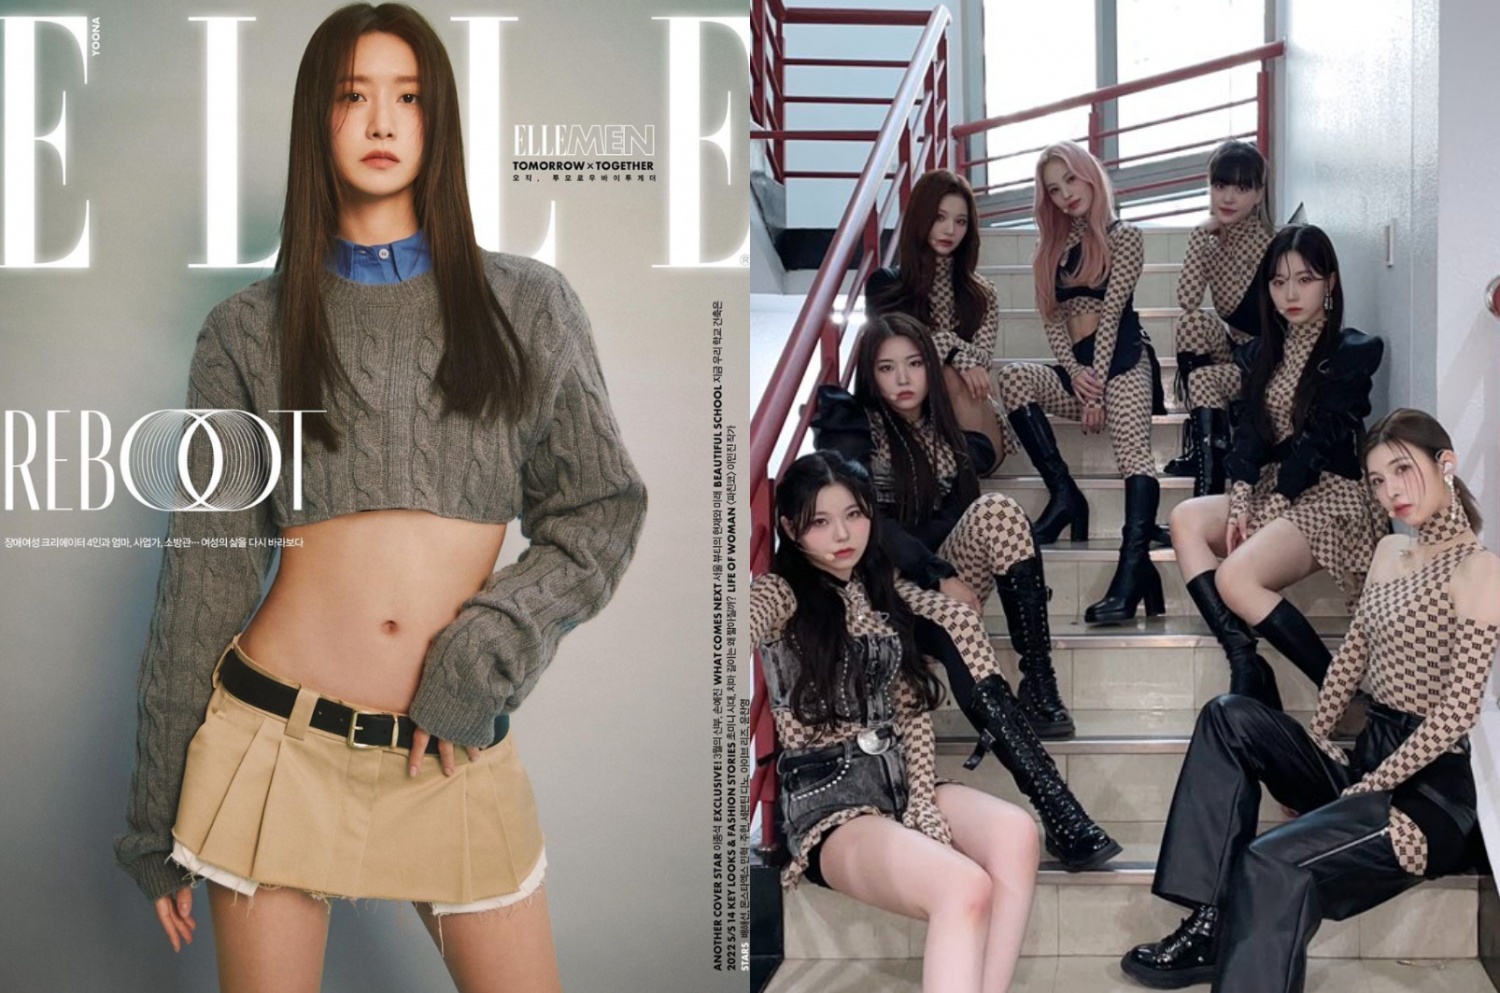 K-pop outfits worn by idols that sparked controversy in 2022